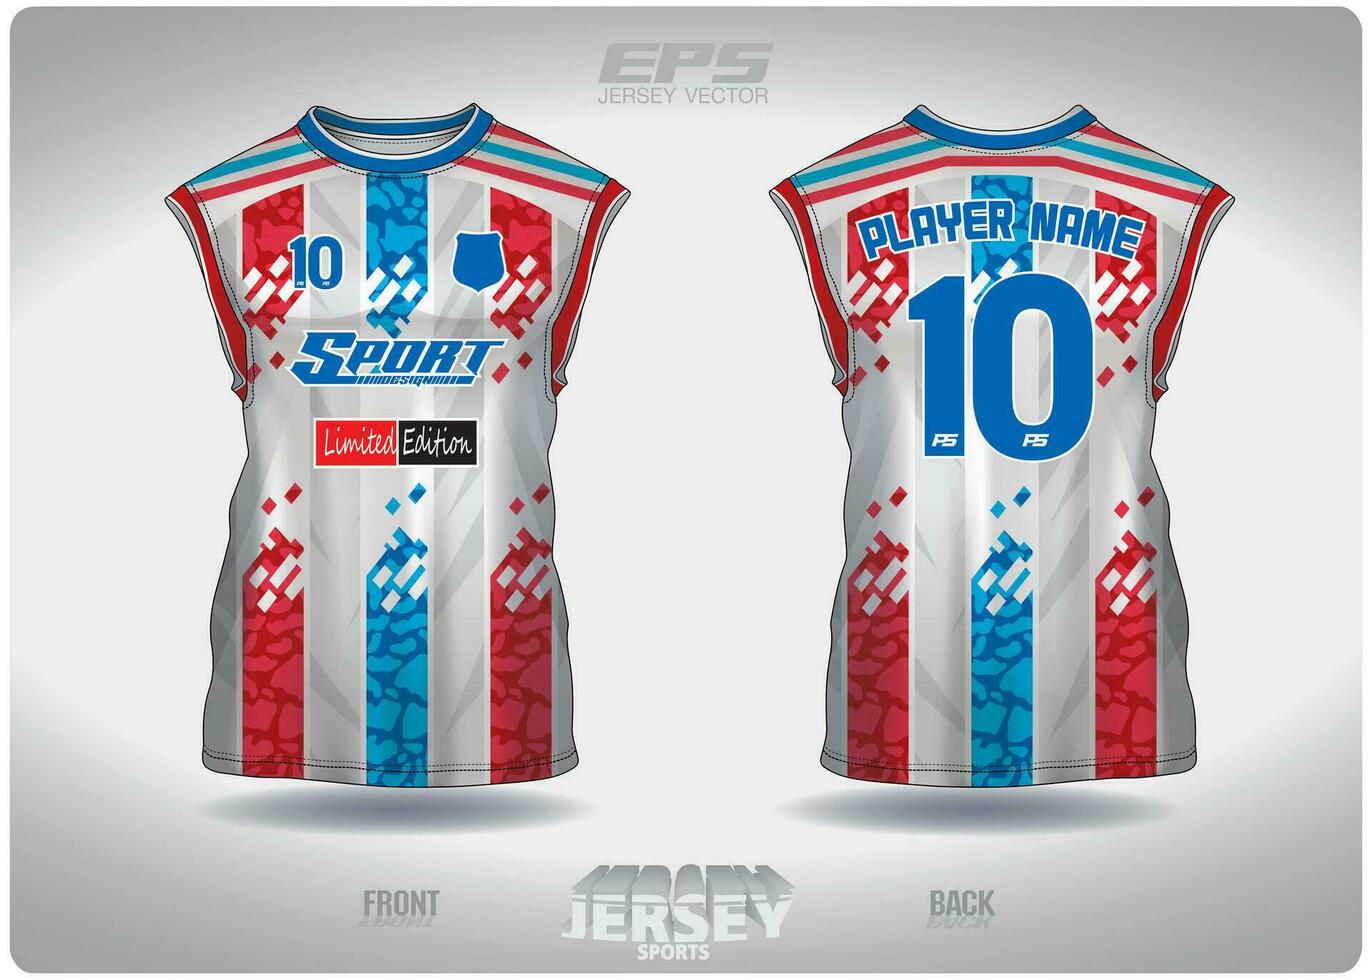 EPS jersey sports shirt vector.blue red stone paving pattern design, illustration, textile background for sleeveless shirt sports t-shirt, football jersey sleeveless shirt vector